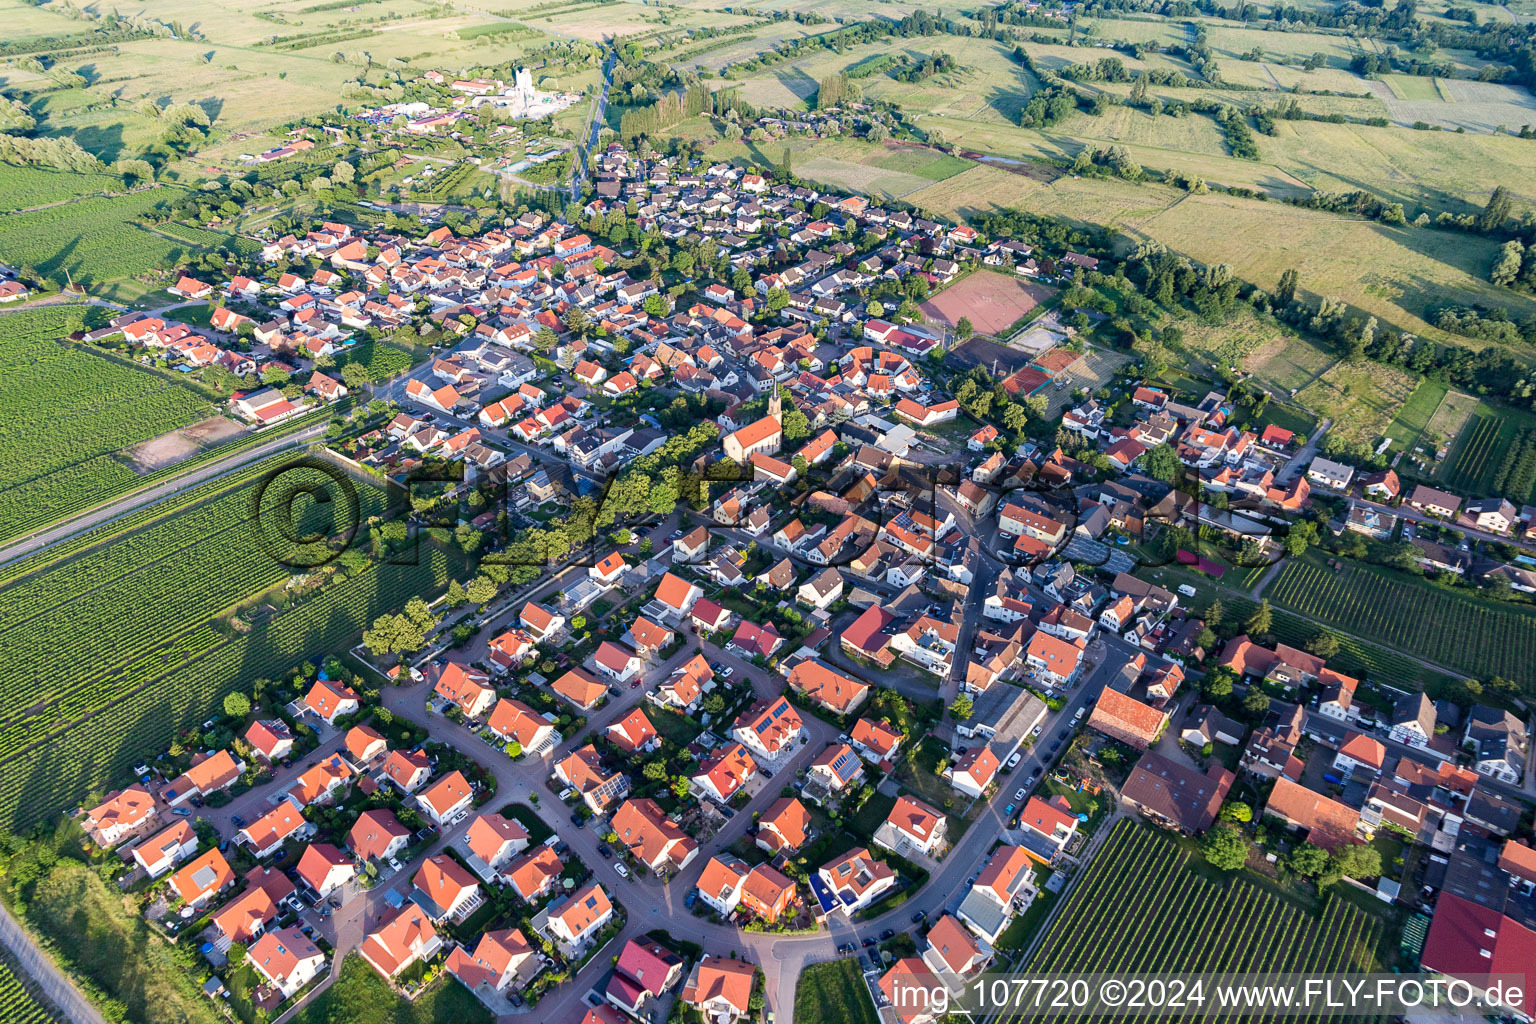 Agricultural land and field borders surround the settlement area of the village in Erpolzheim in the state Rhineland-Palatinate, Germany from above